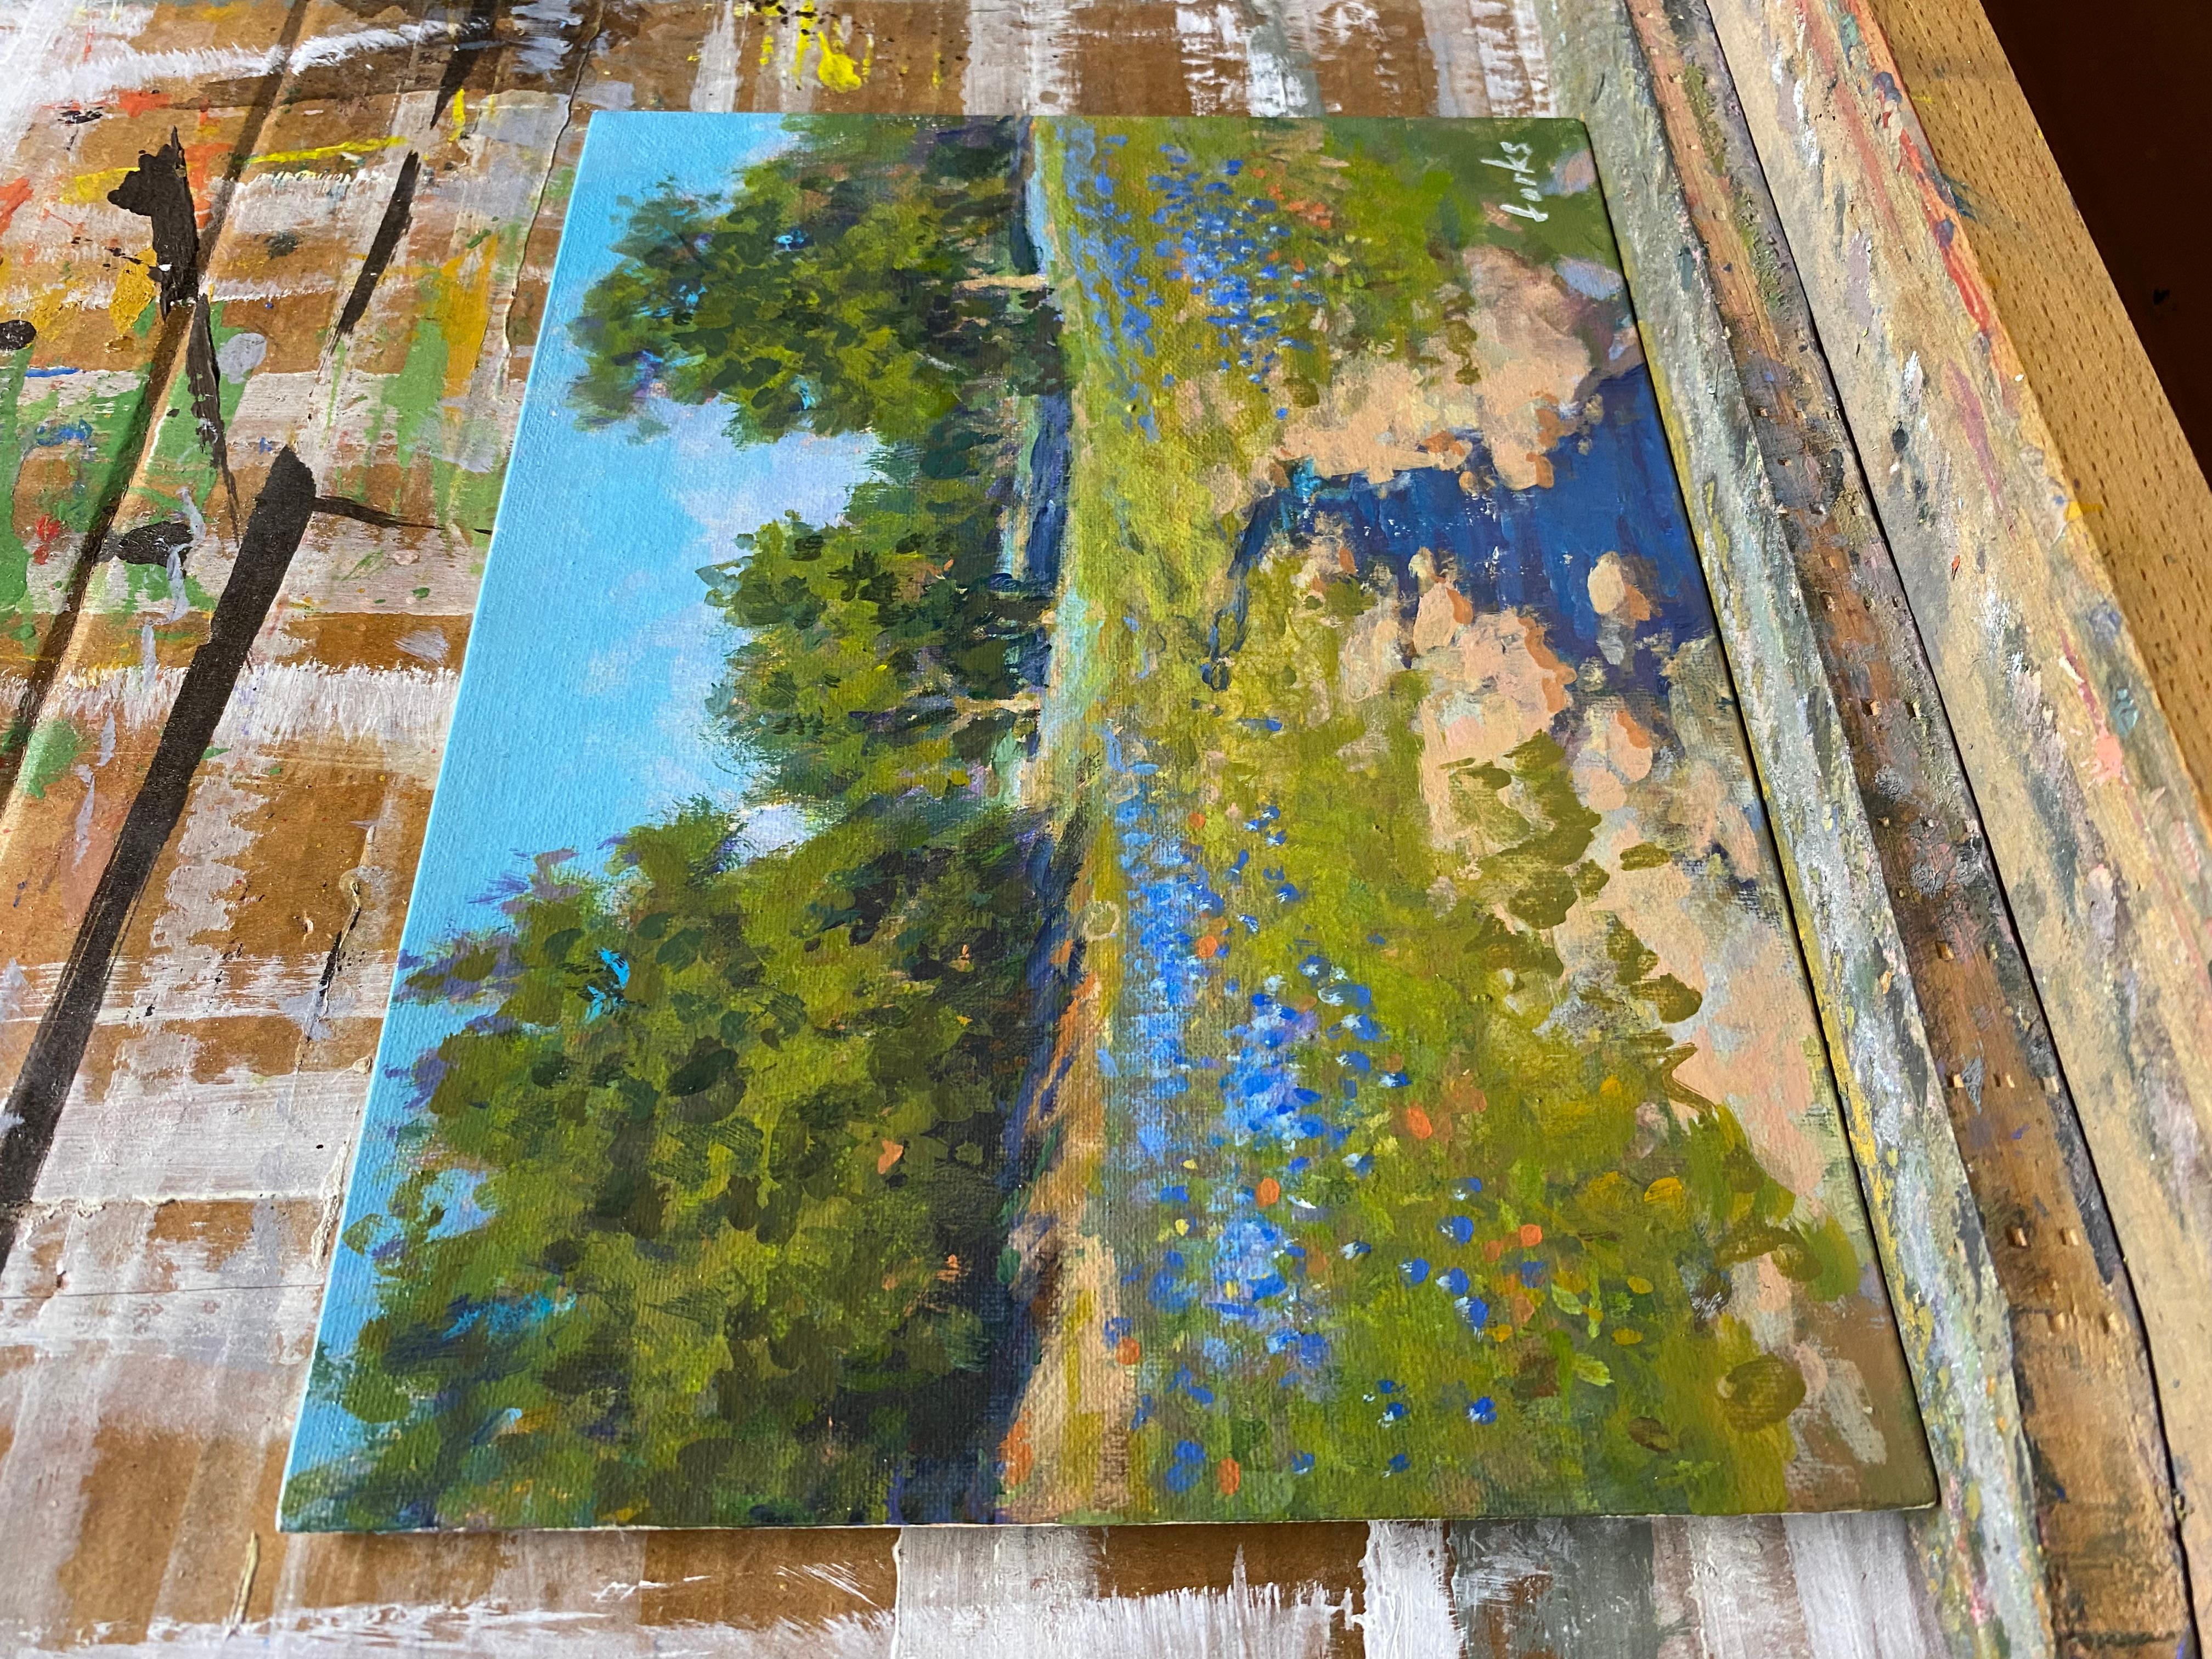 <p>Artist Comments<br />Following rainfall, a small brook remains in the heart of a hill in Willow City near Fredericksburg, Texas. Bluebonnets scatter across the ground, creating a tonal harmony with the water and the sky. The lush greens of the